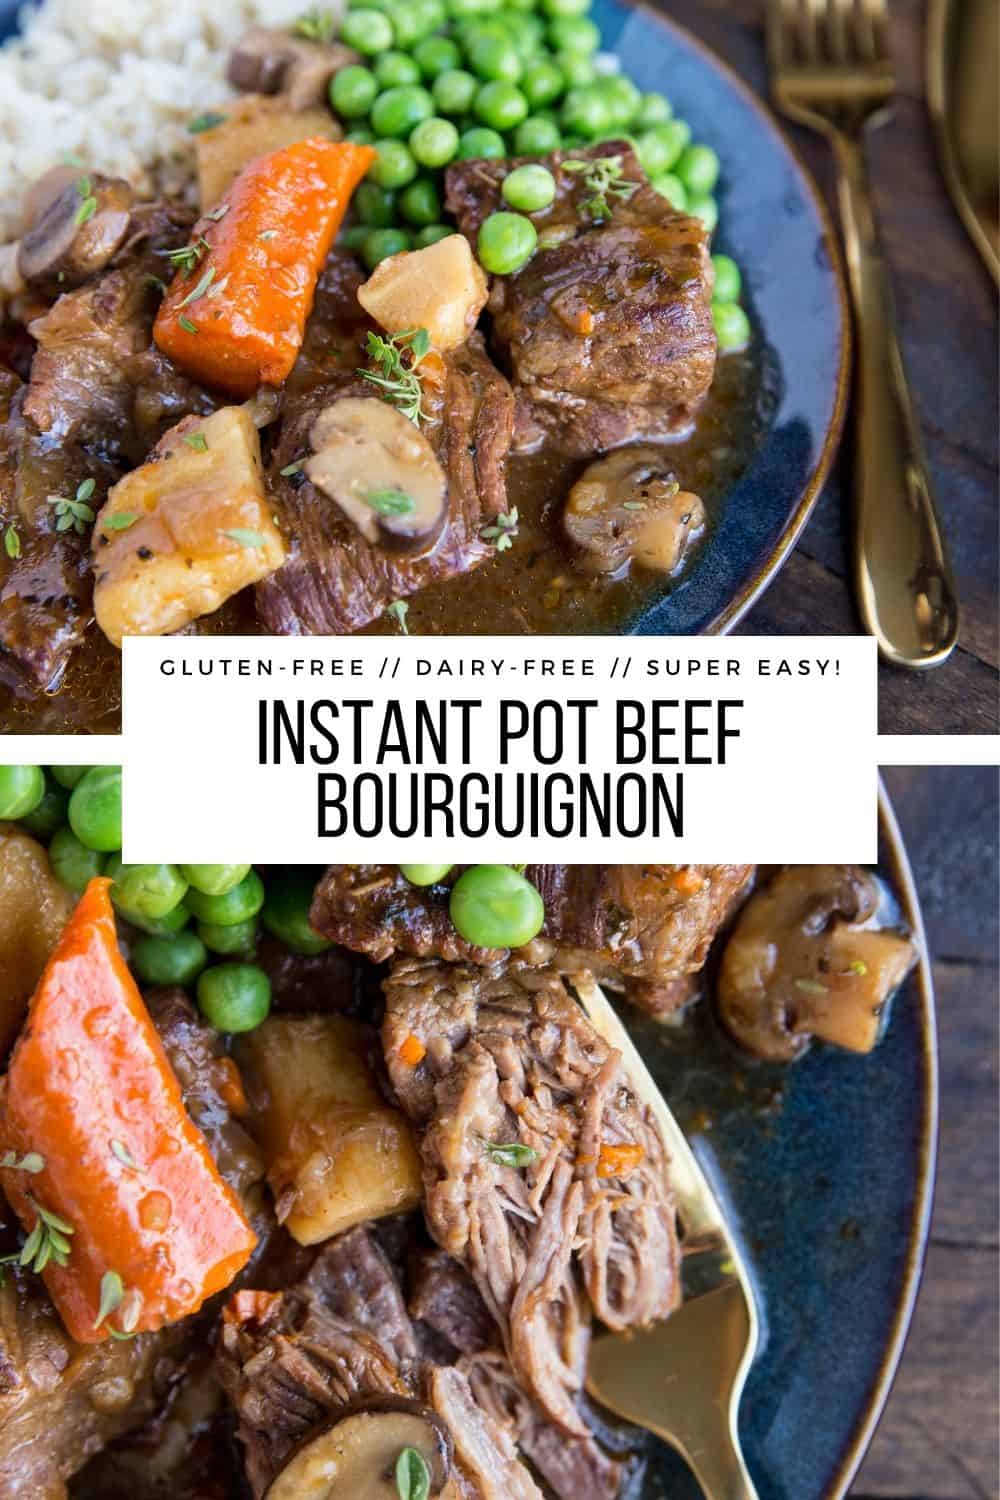 Instant Pot Beef Bourguignon (Gluten-Free) - The Roasted Root